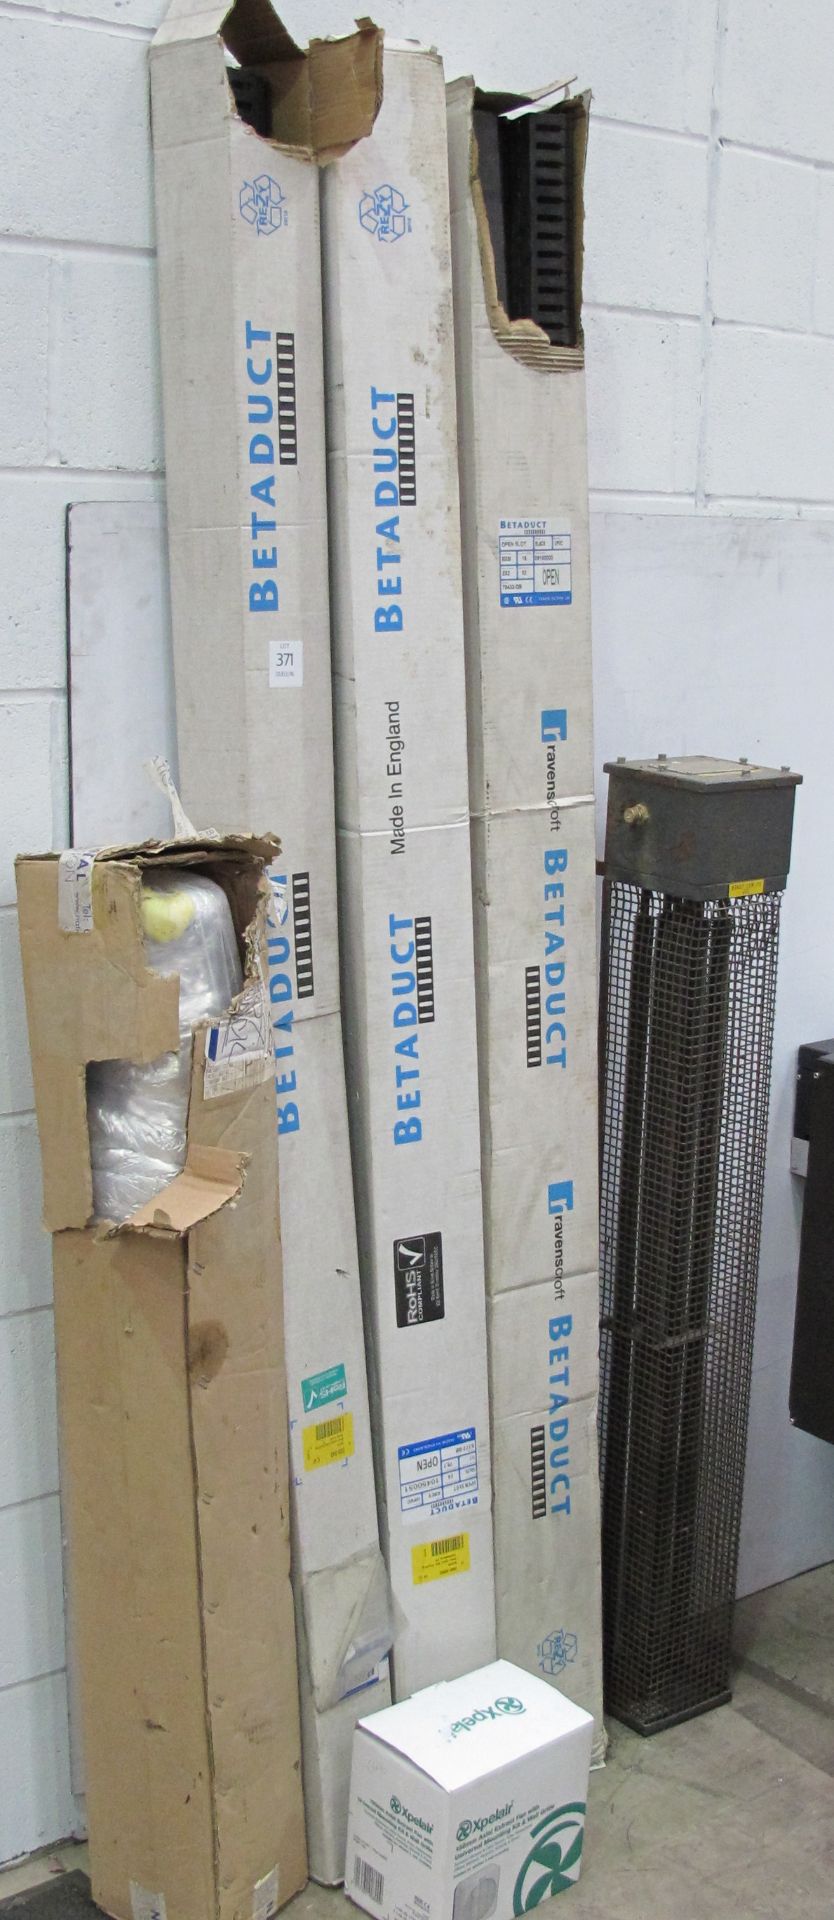 3 x packs of Beta Duct Electrical Ducting, a Heatex Limited Floor Heater, insulated flue and and